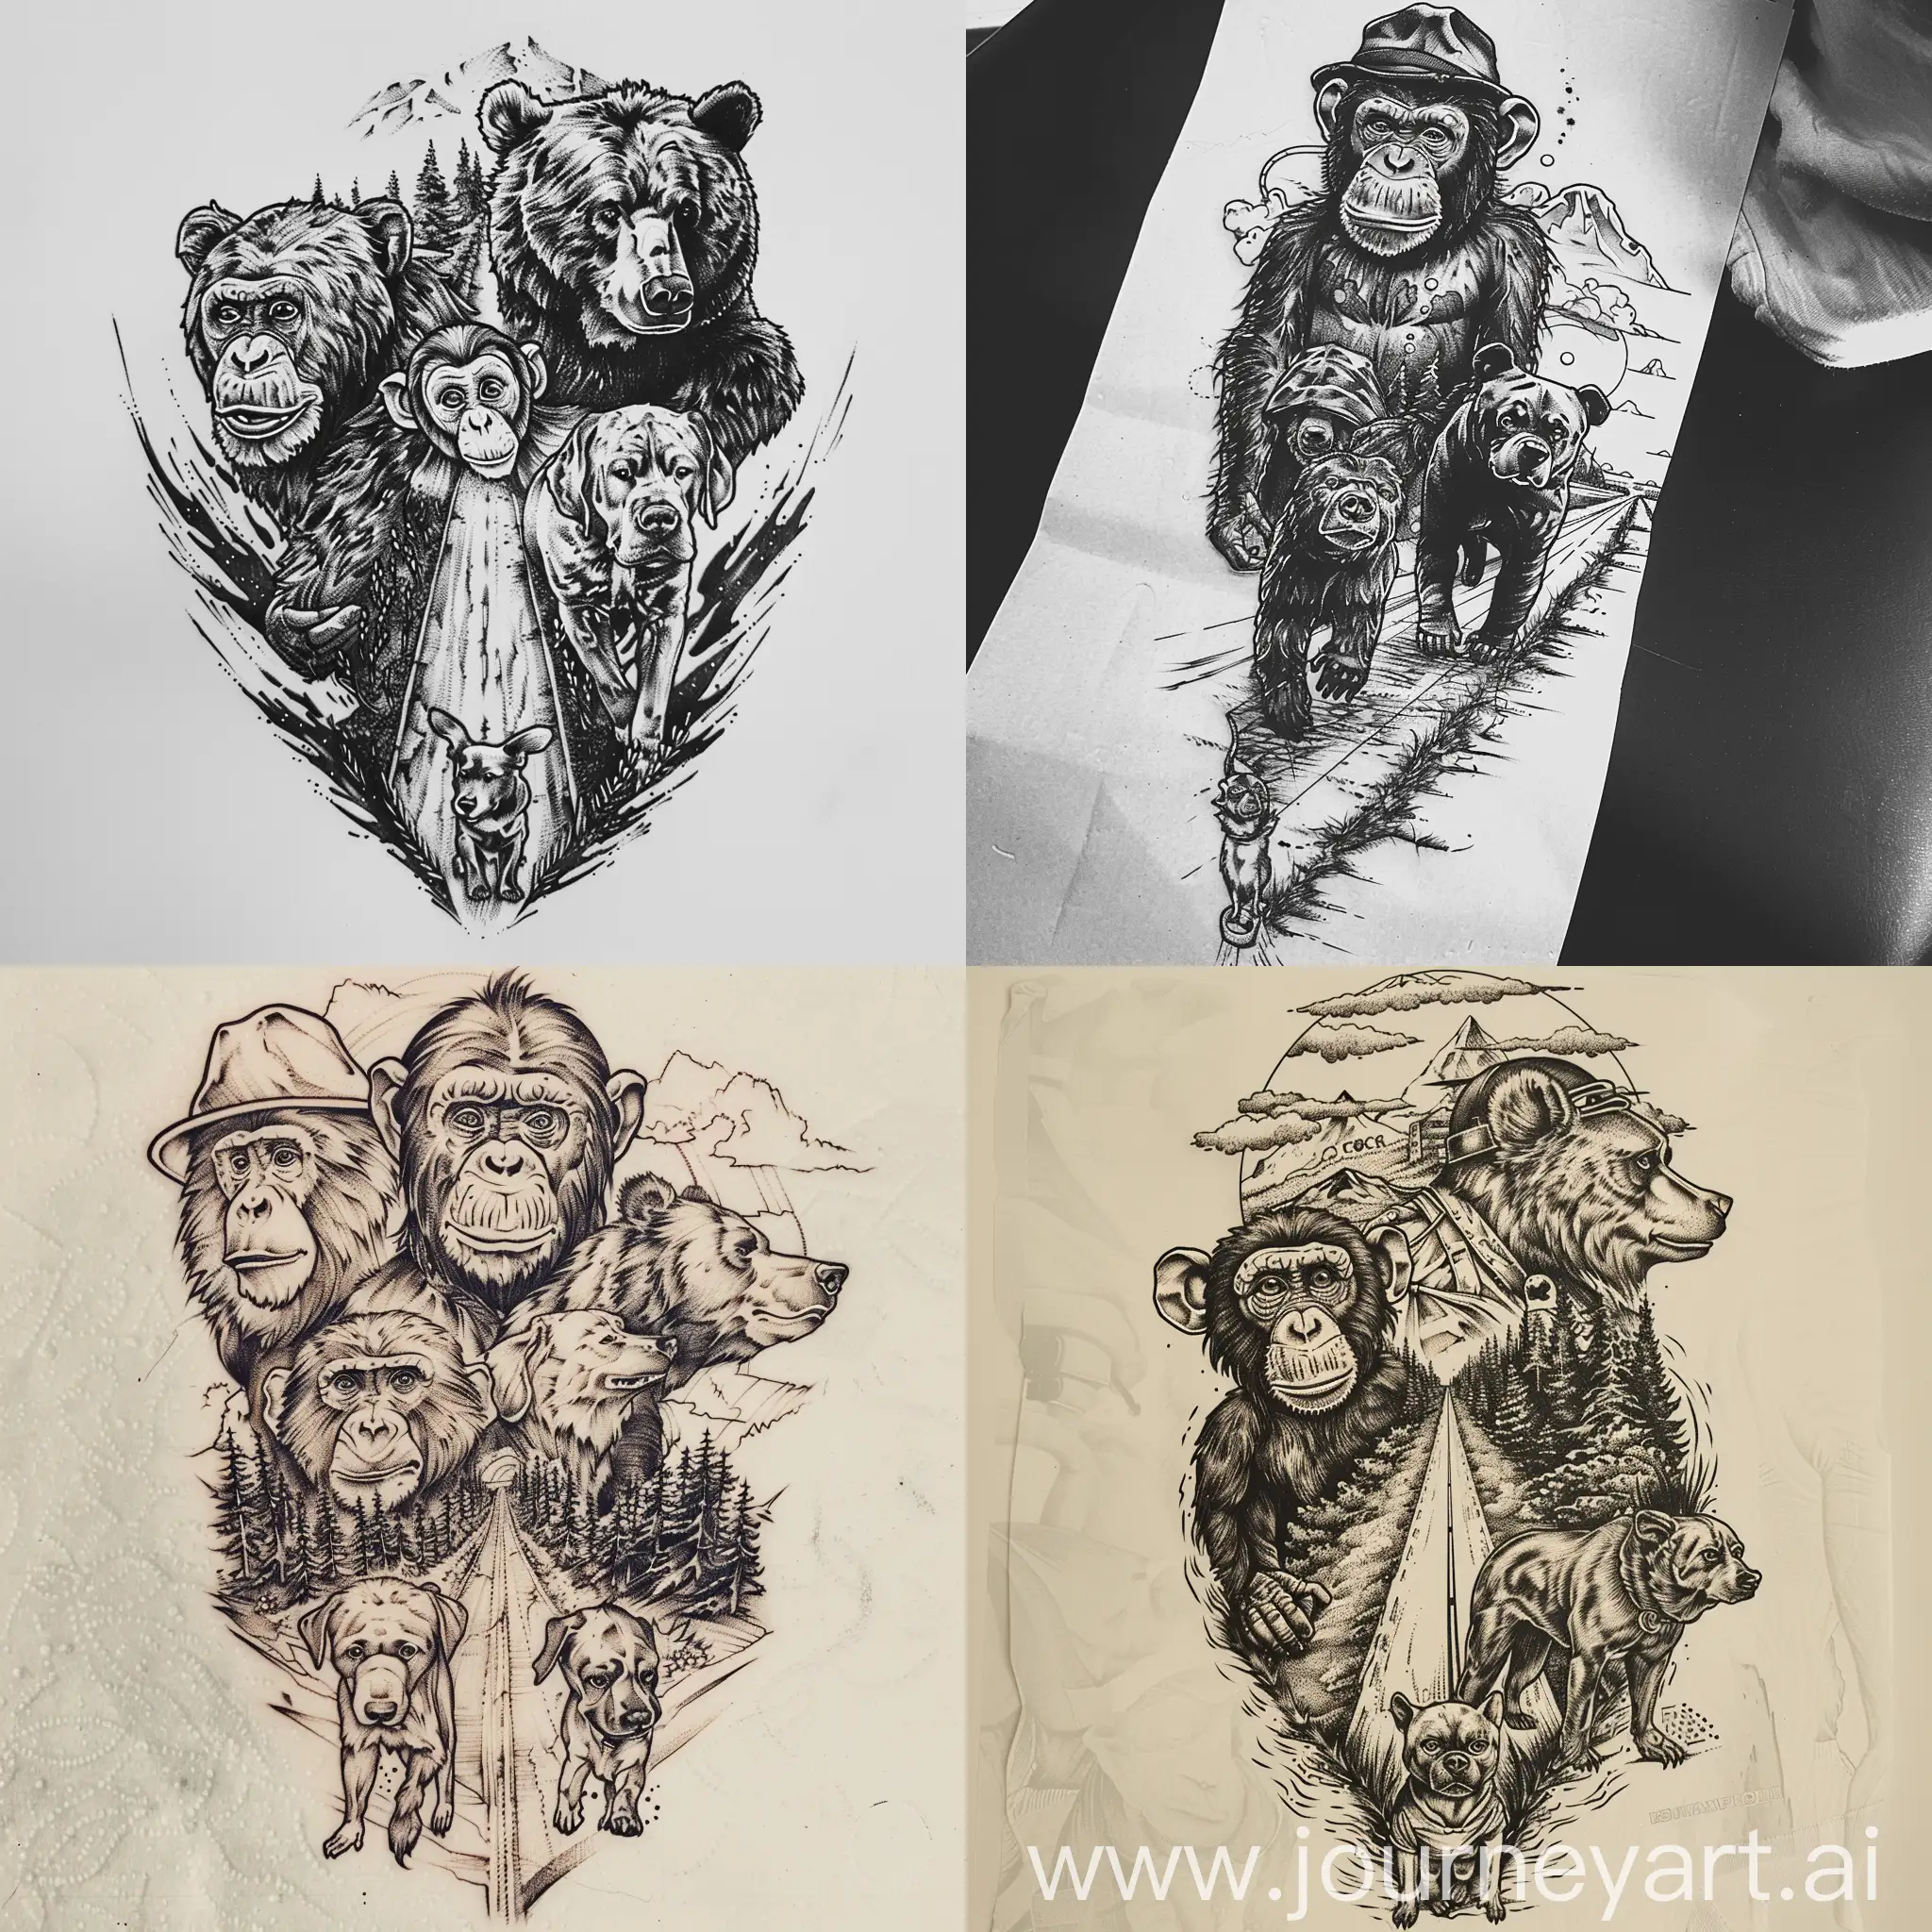 Country-Road-Adventure-Monkey-Bear-and-Dog-Tattoo-Design